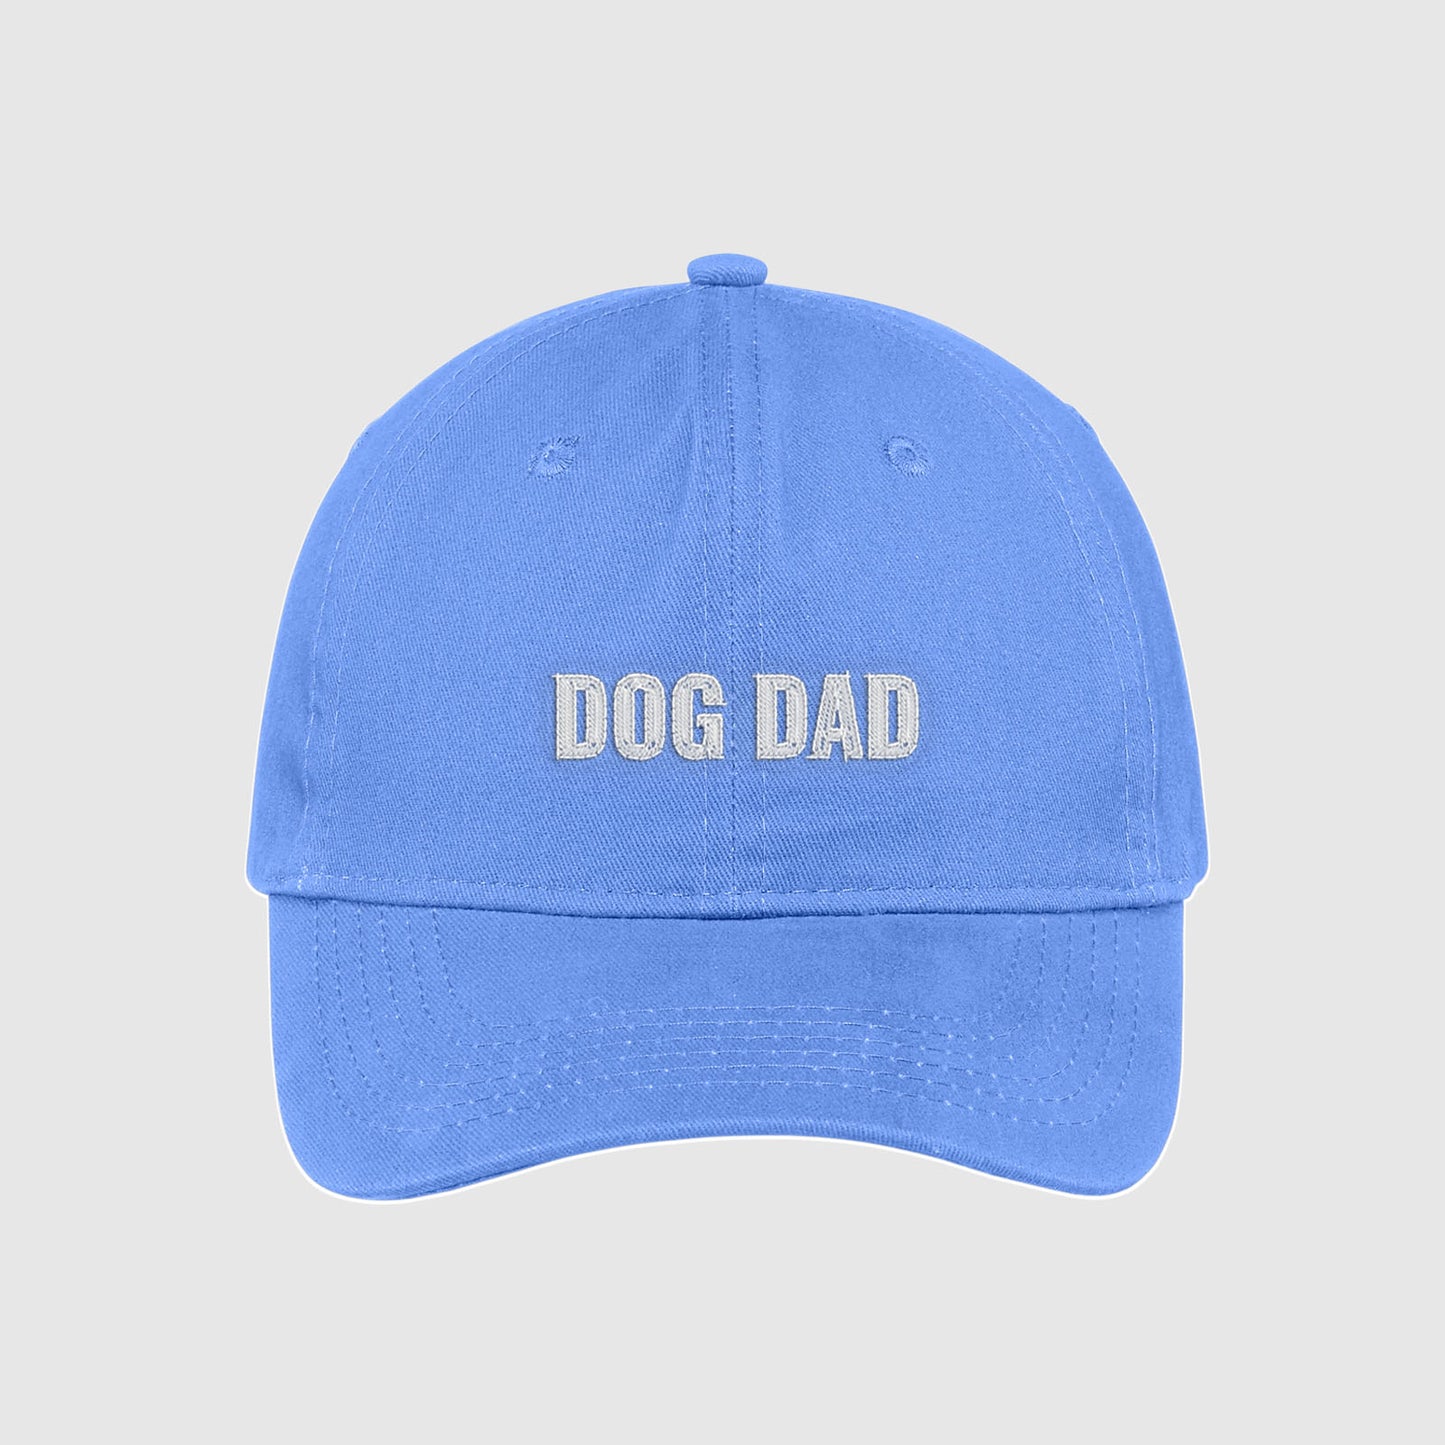 Carolina Blue Dog Dad Hat embroidered with white text